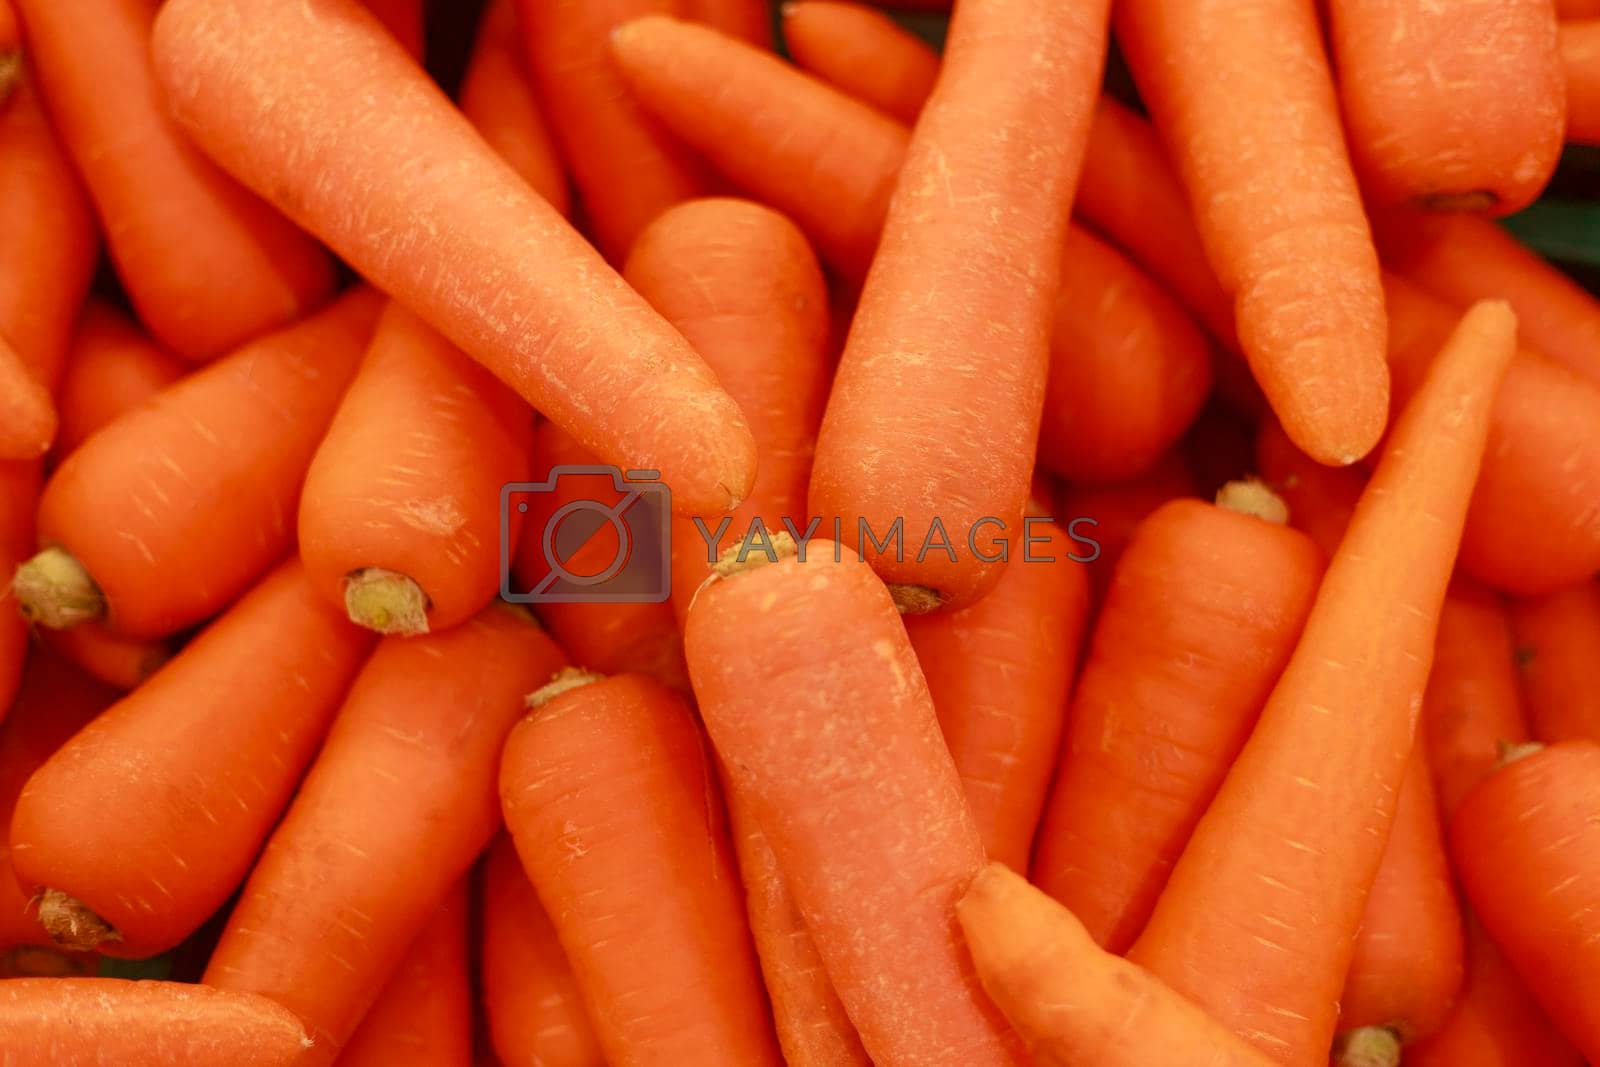 Royalty free image of Close up food vegetable carrot. Texture background of fresh large orange carrots. Background photo of carrots by Satrinekarn